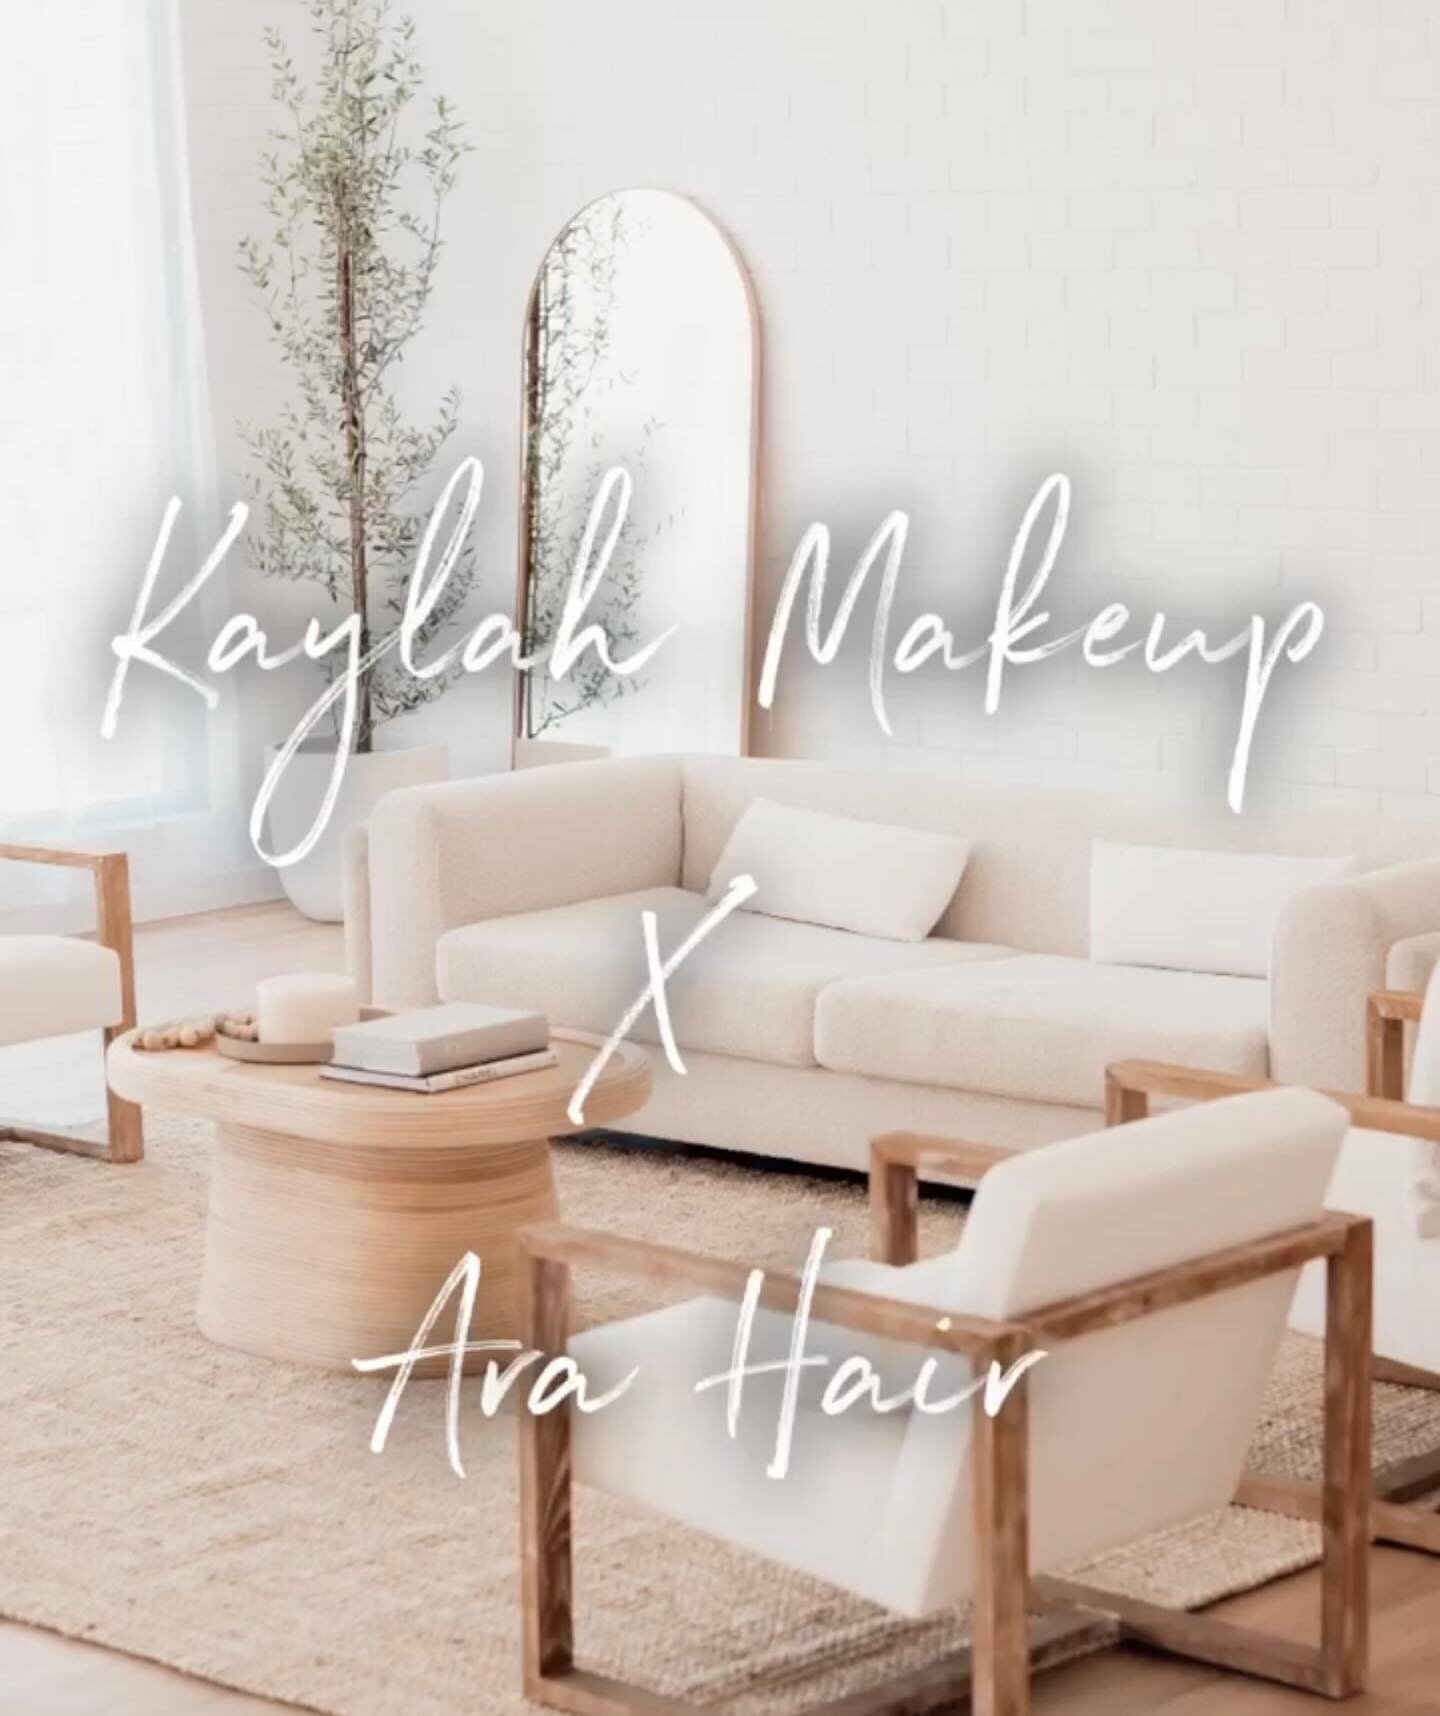 EXCITING NEWS ✨✨✨

Our beautiful friend and talented MUA @kaylah.makeup is moving into our beautiful new space as our in house make up artist 😍

Kaylah will be taking bookings for Saturday appointments via the salon so if you would like to book her 